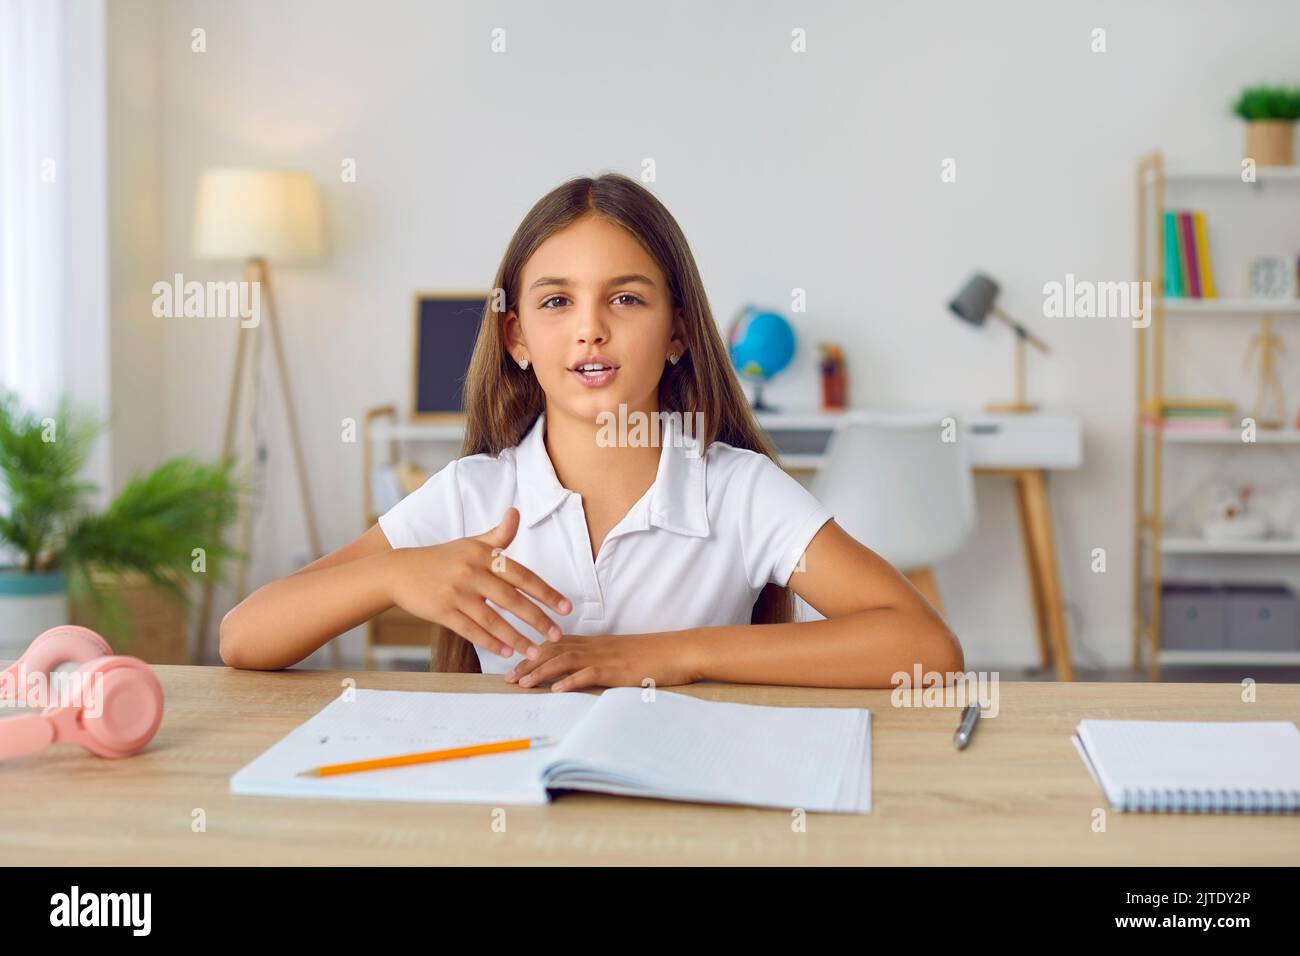 Elementary school girl sitting at her desk at home, having an online lesson and talking Stock Photo